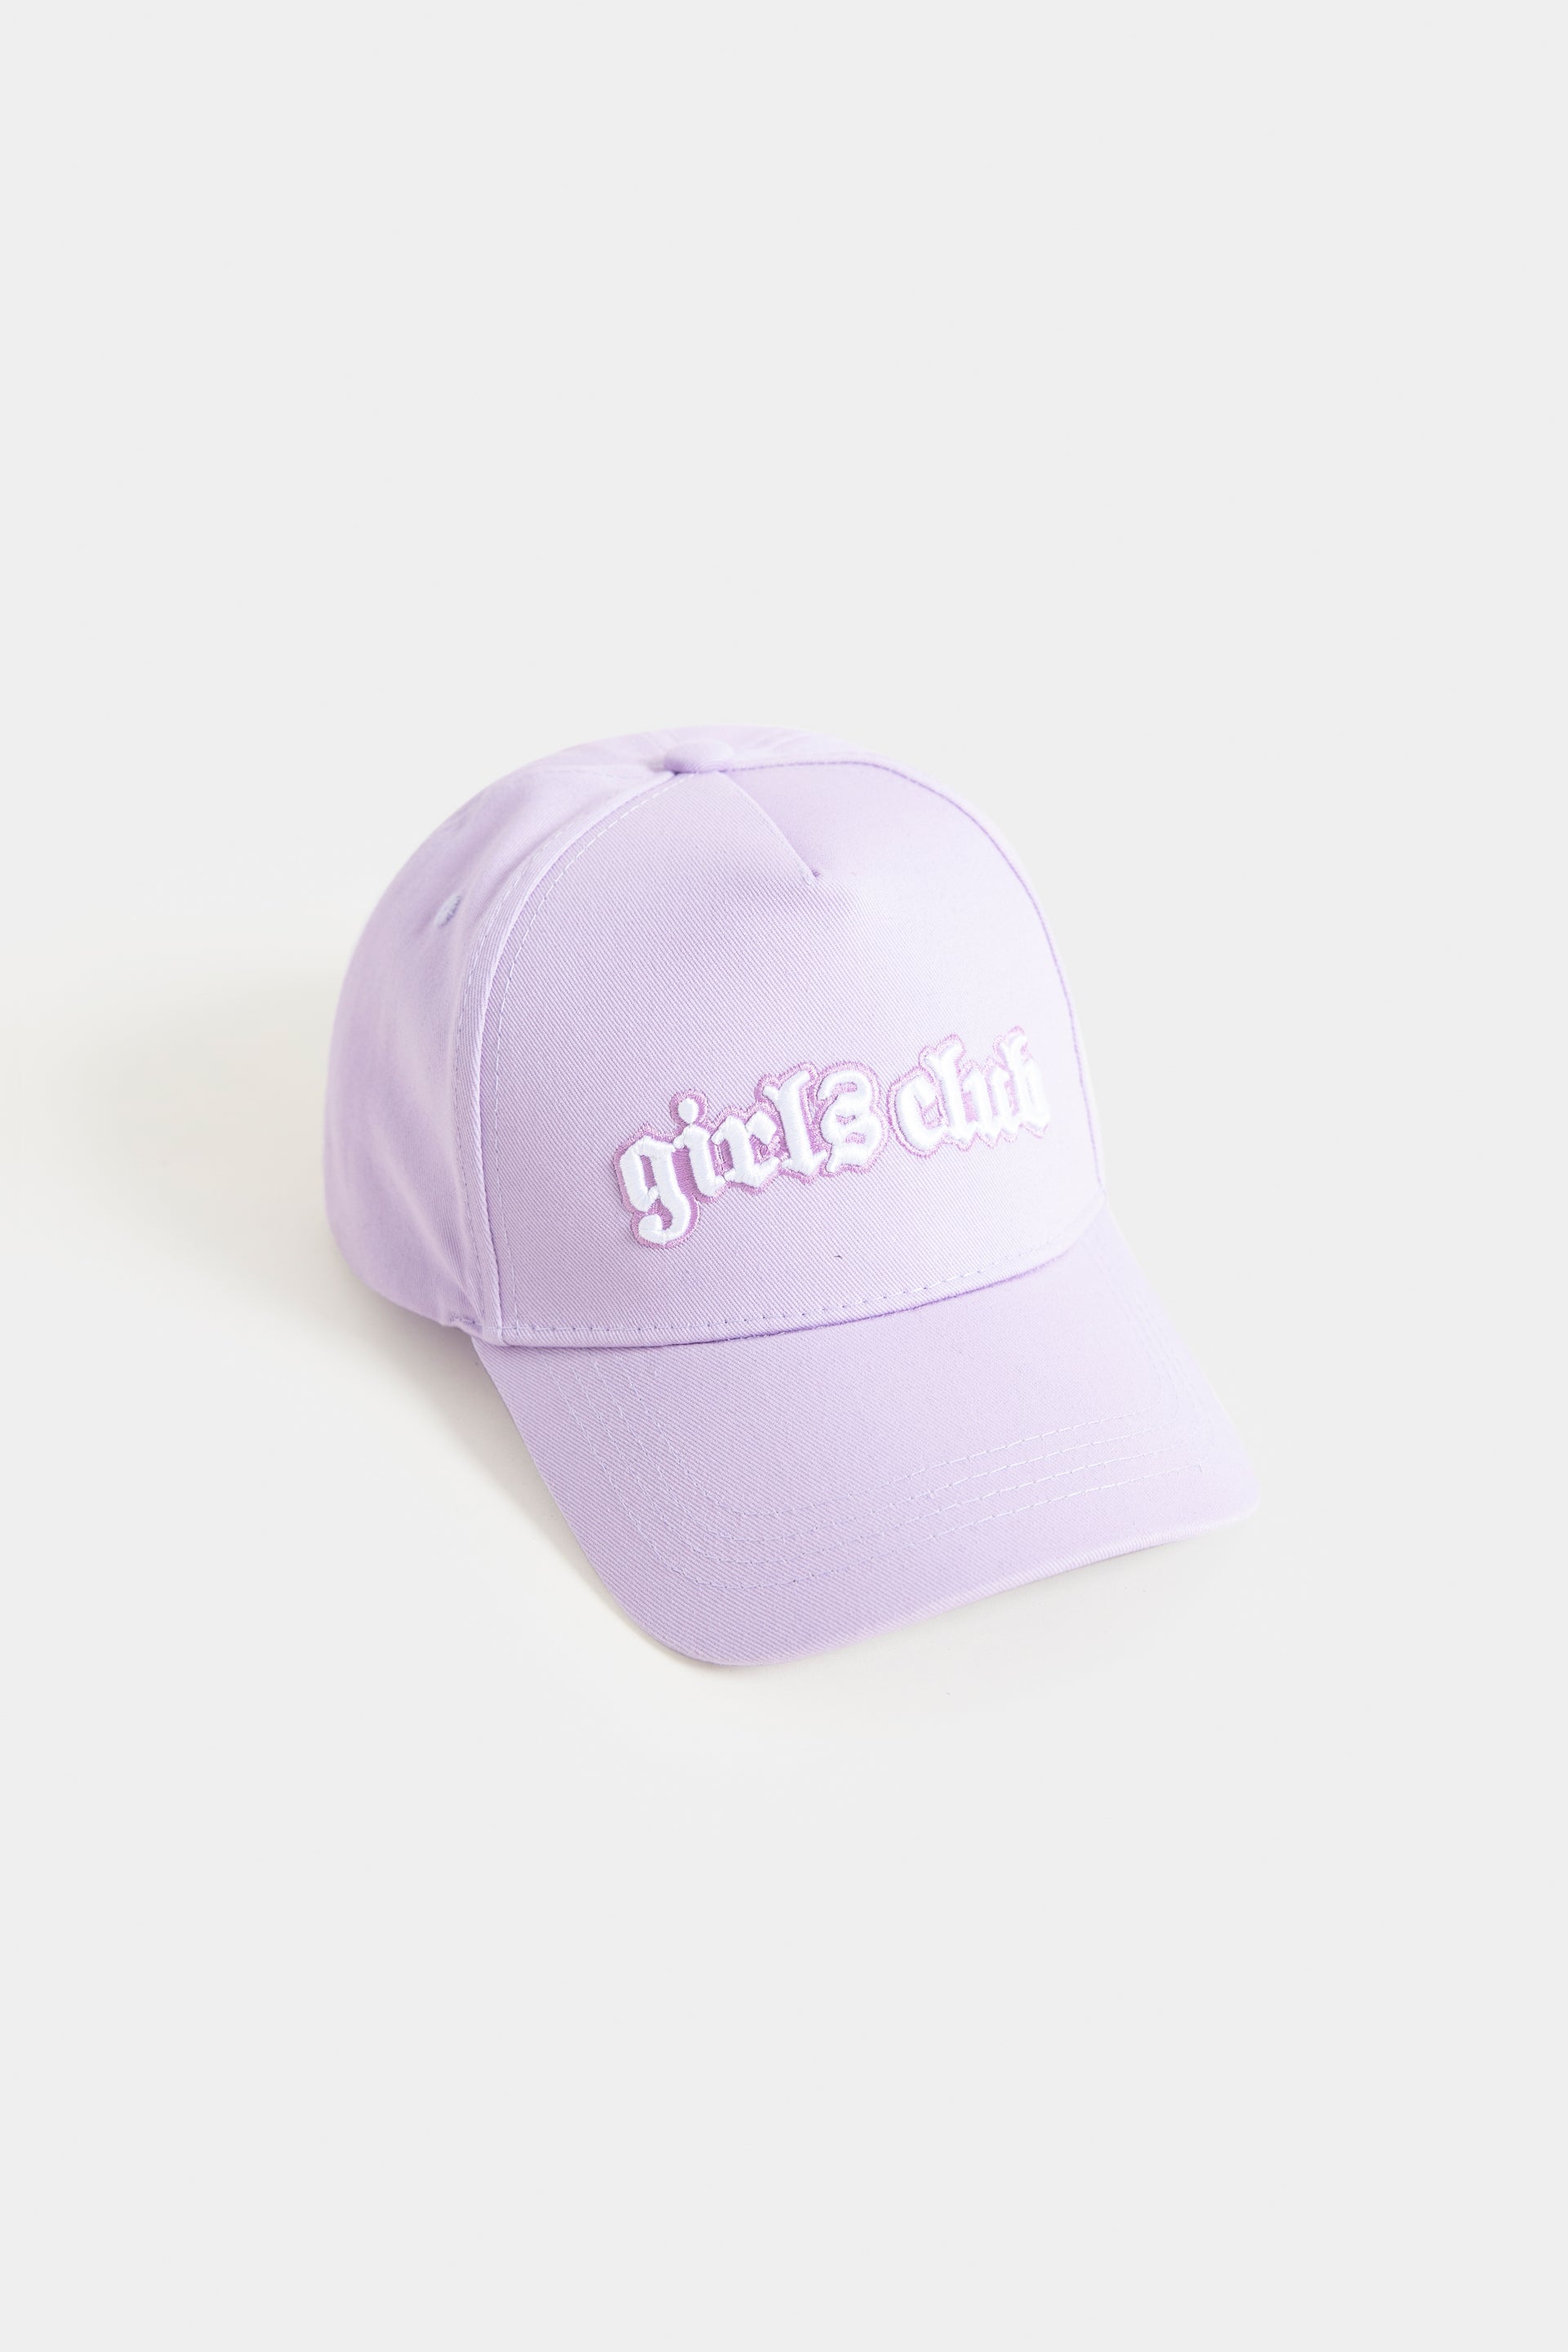 Girls Club Embroidered Cap